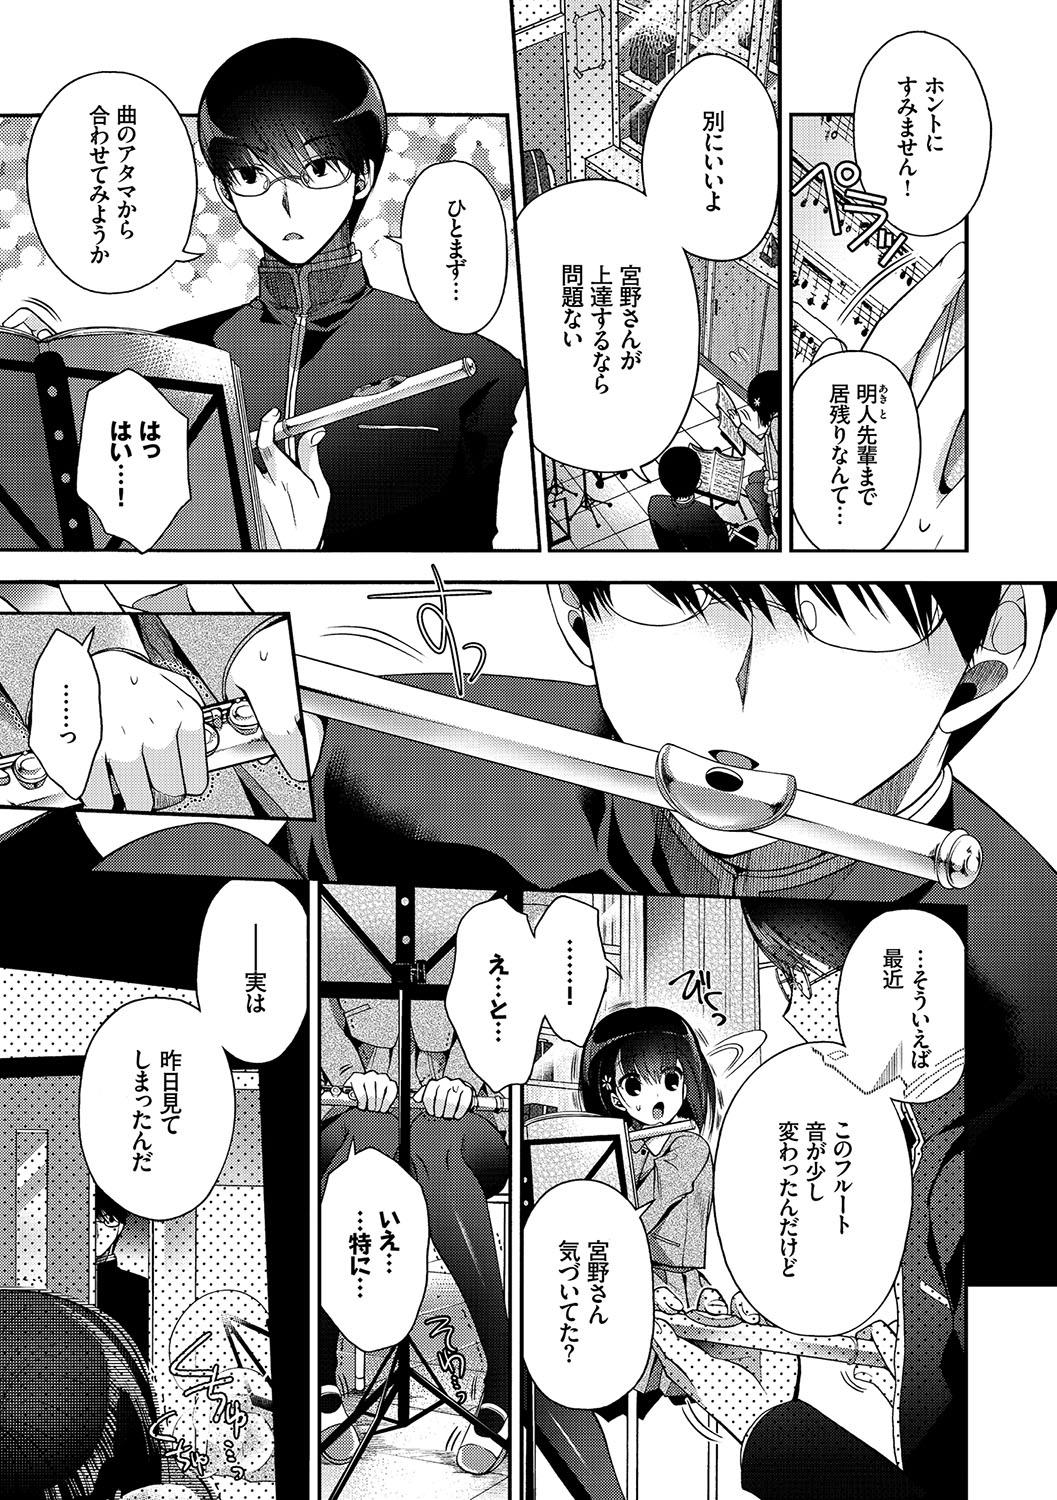 Body Massage Hatsukoi Melty - Melty First Love Guys - Page 6